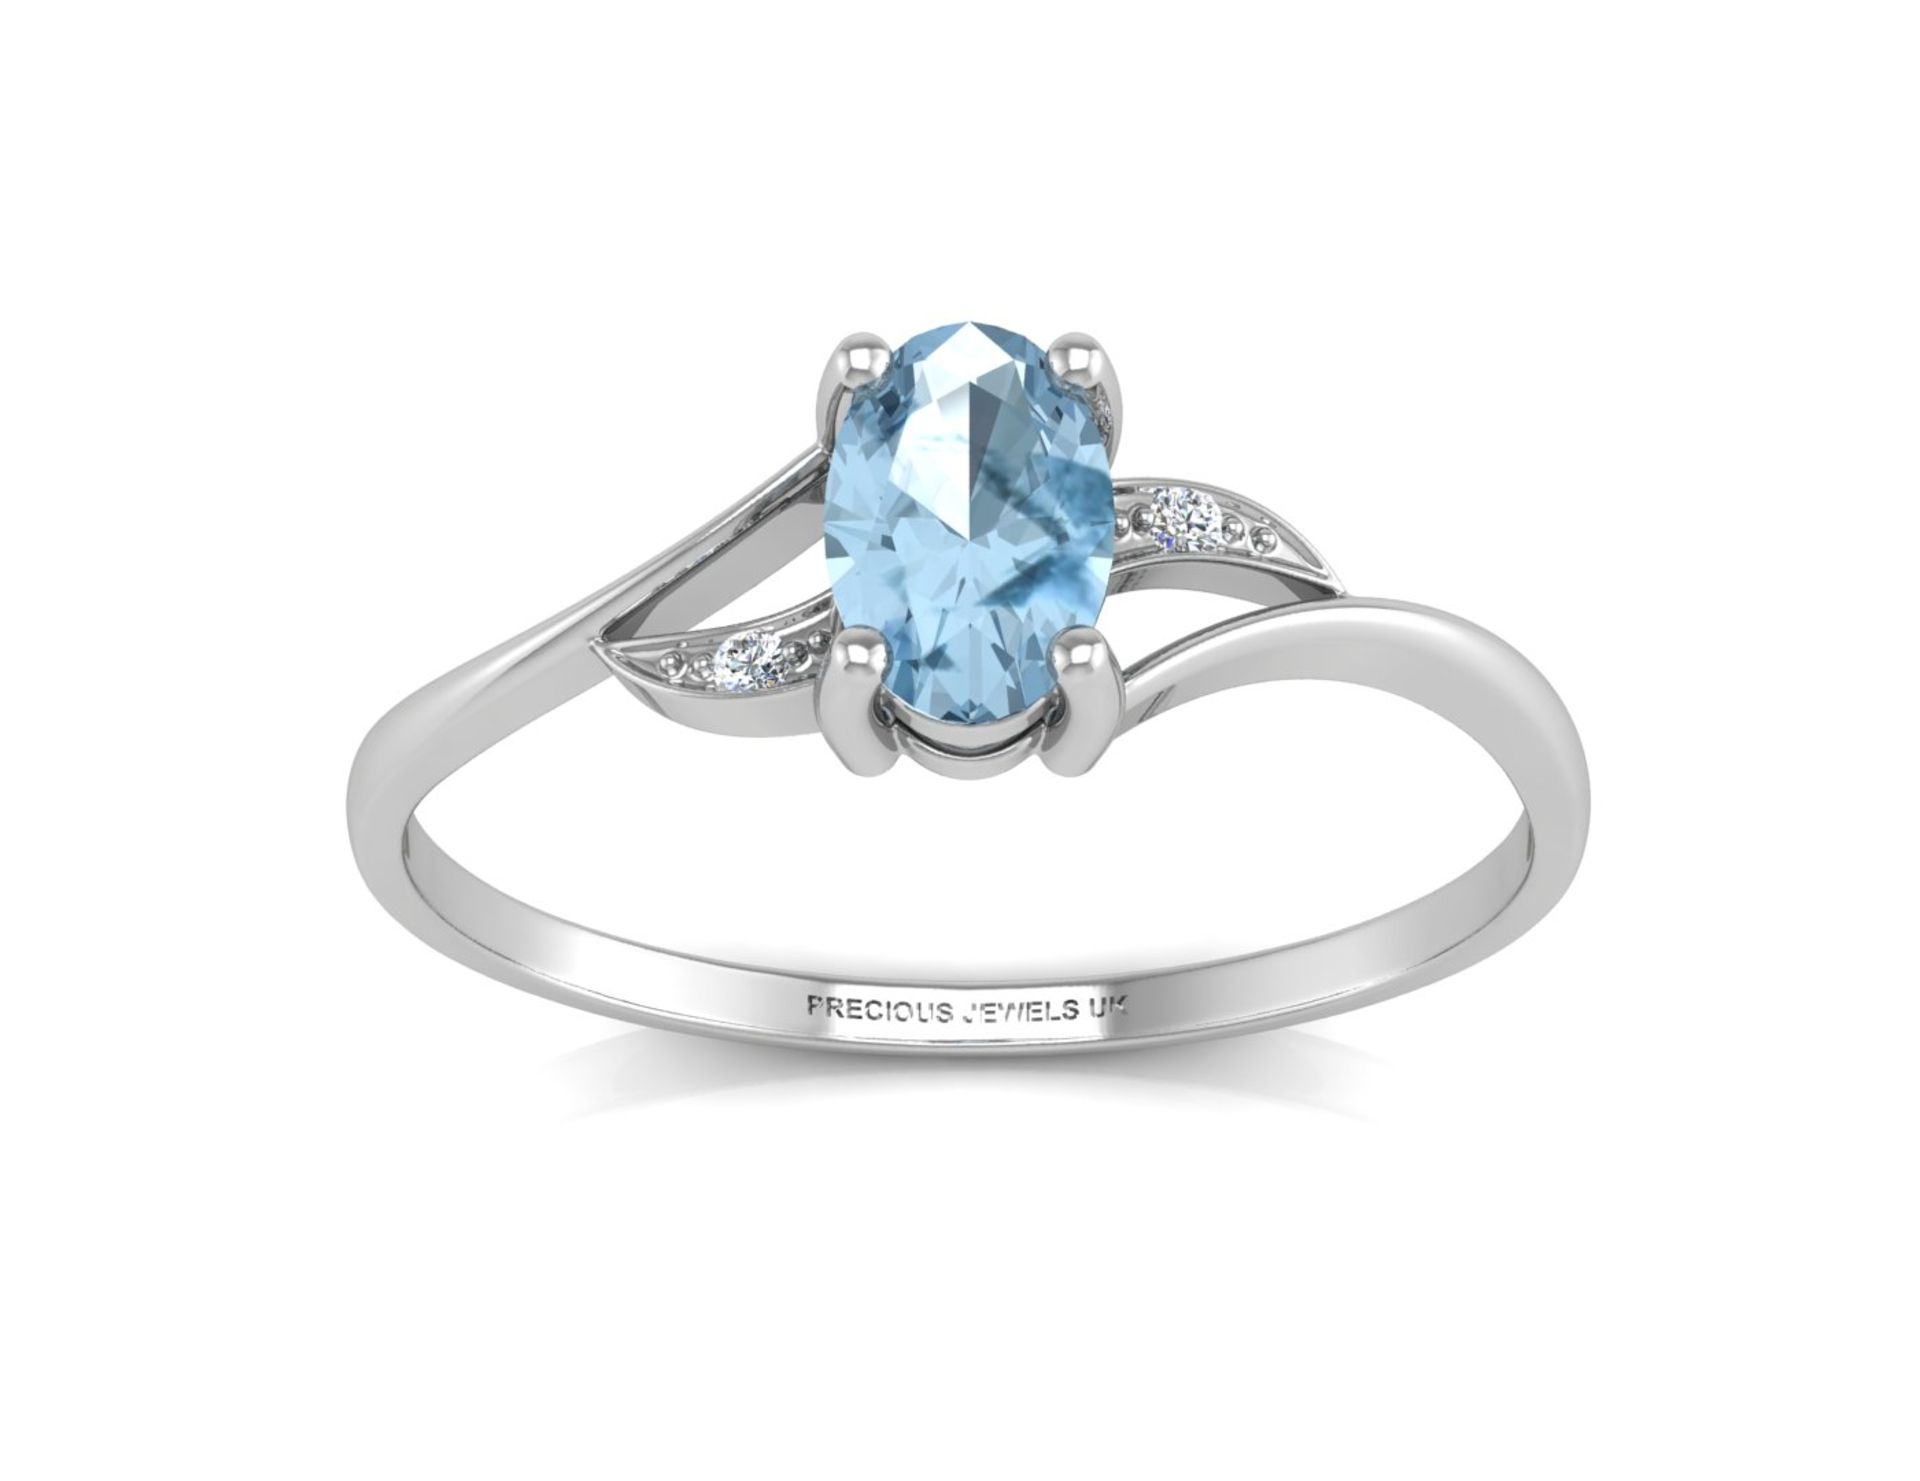 9ct White Gold Diamond And Blue Topaz Ring 0.01 Carats - Valued by GIE £745.00 - 9ct White Gold - Image 3 of 5